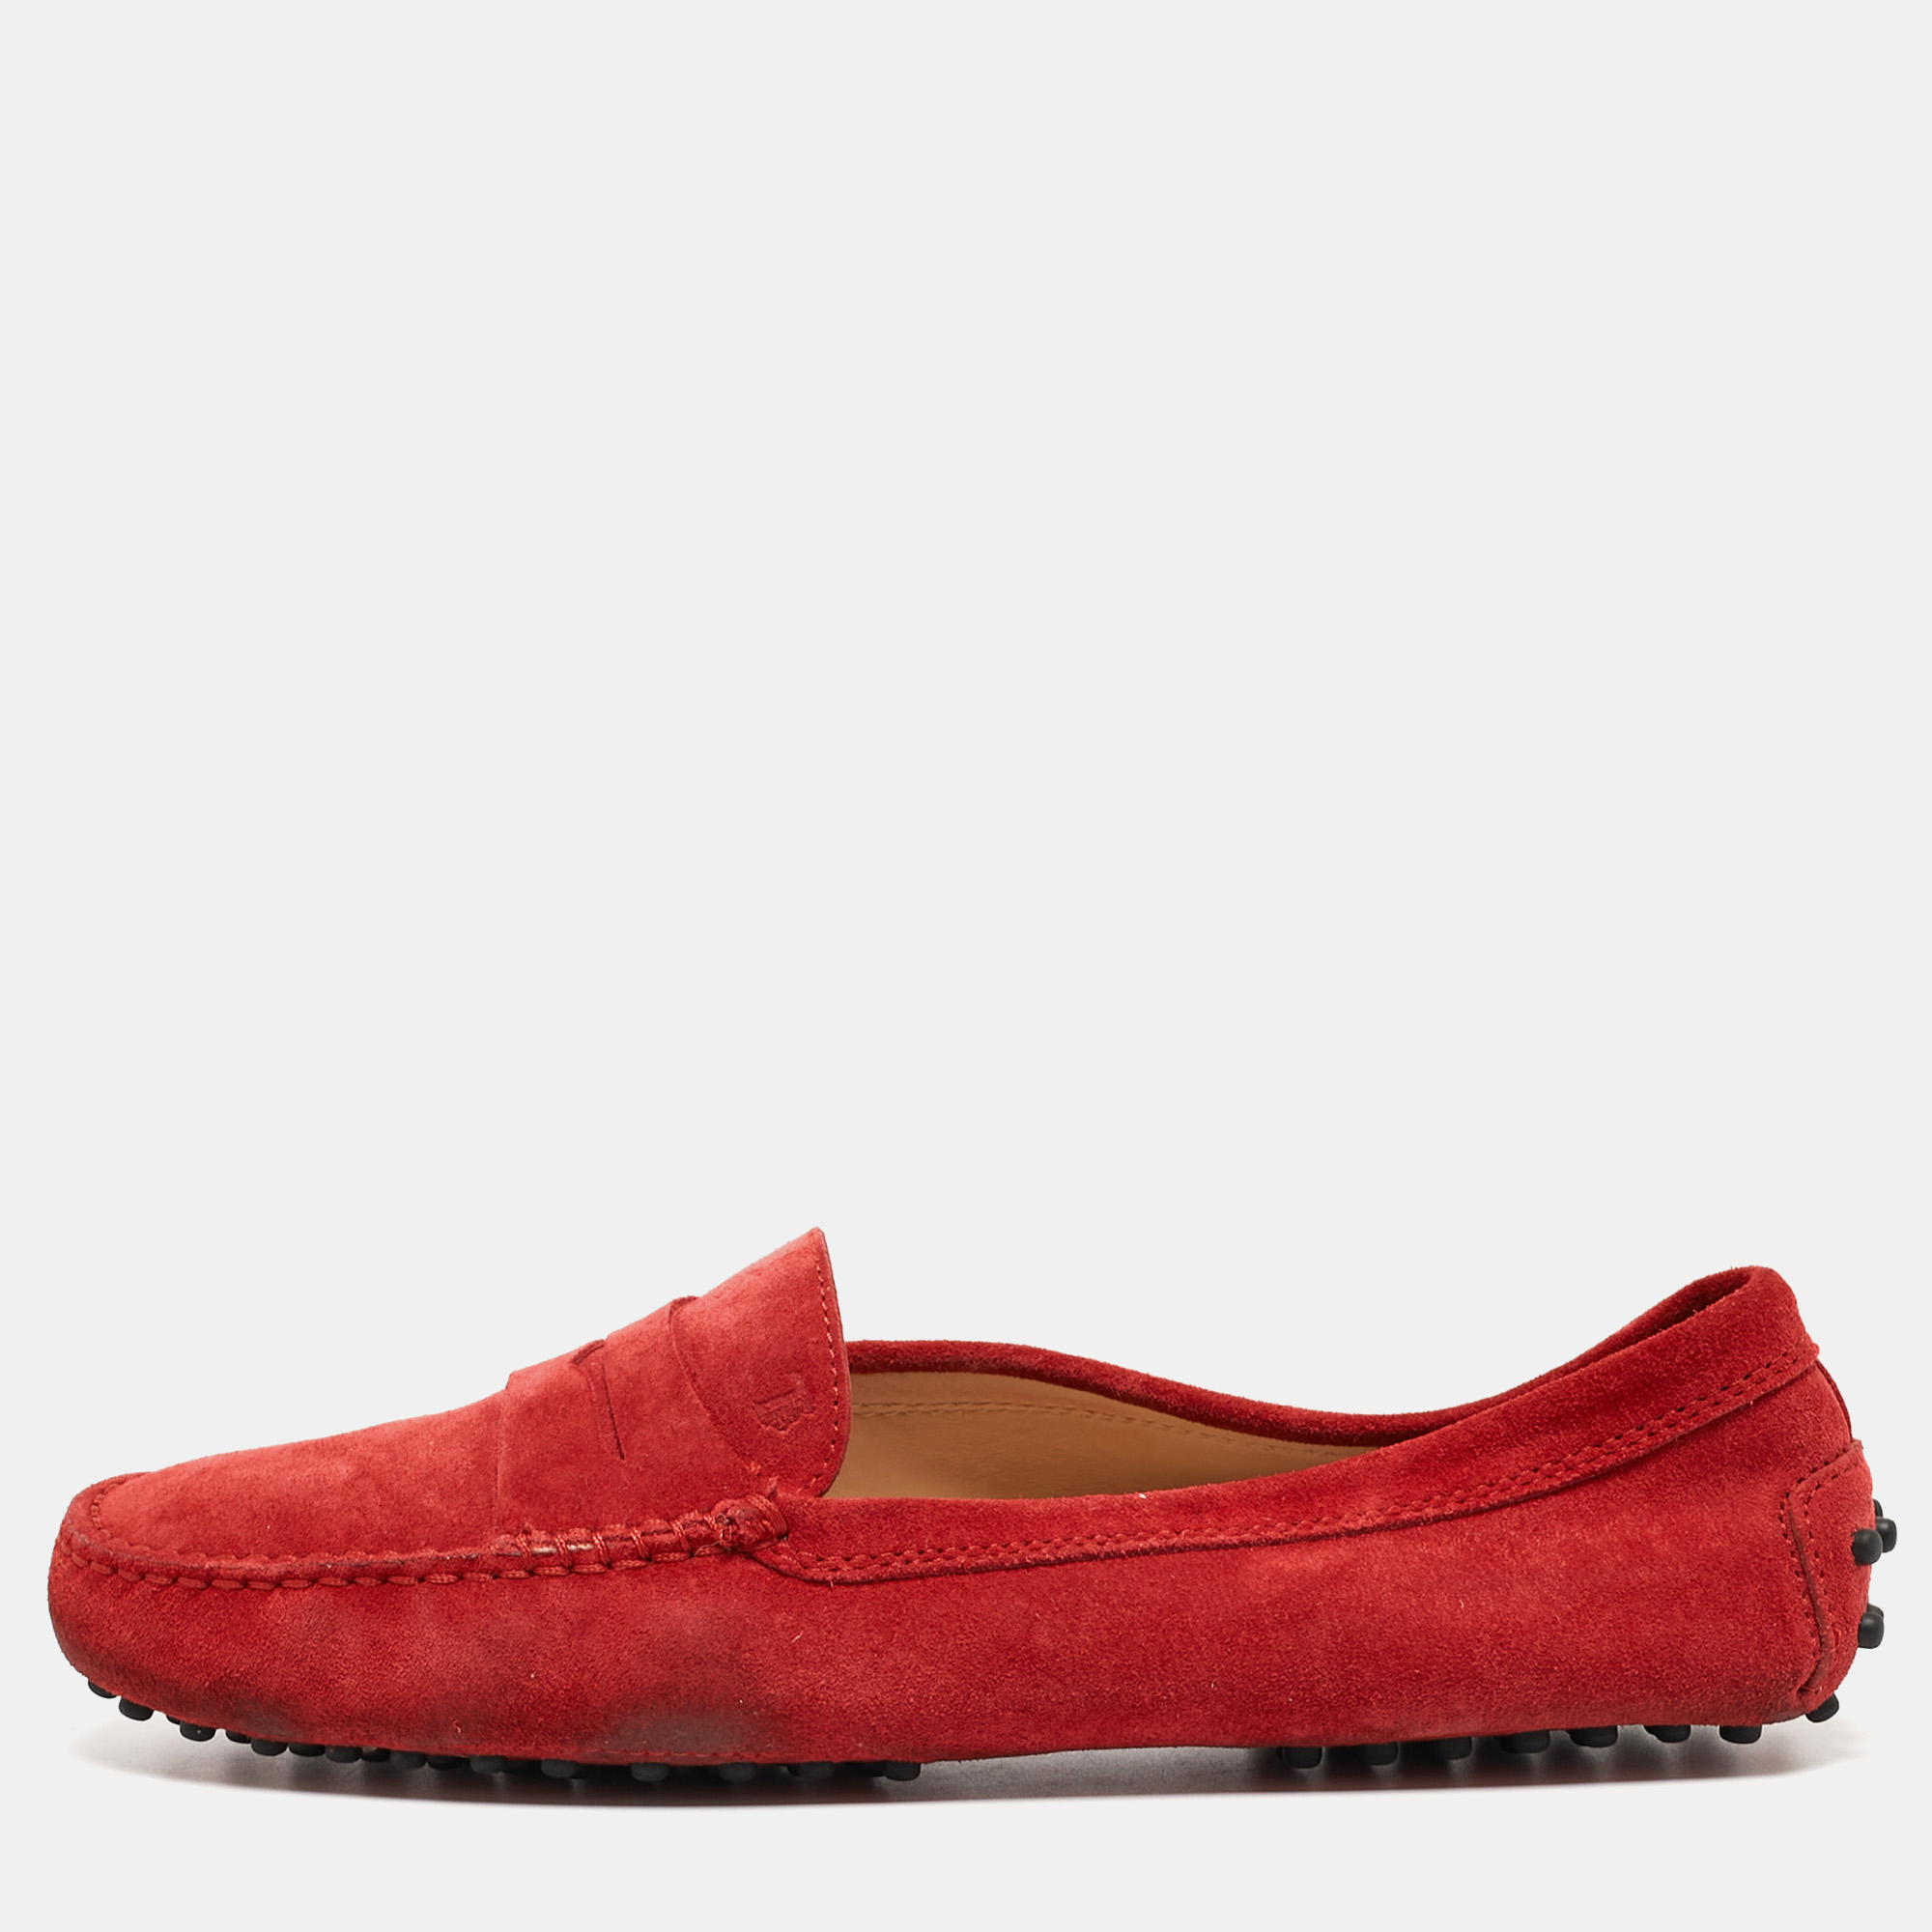 Tod's Red Suede Penny Loafers Size 39.5